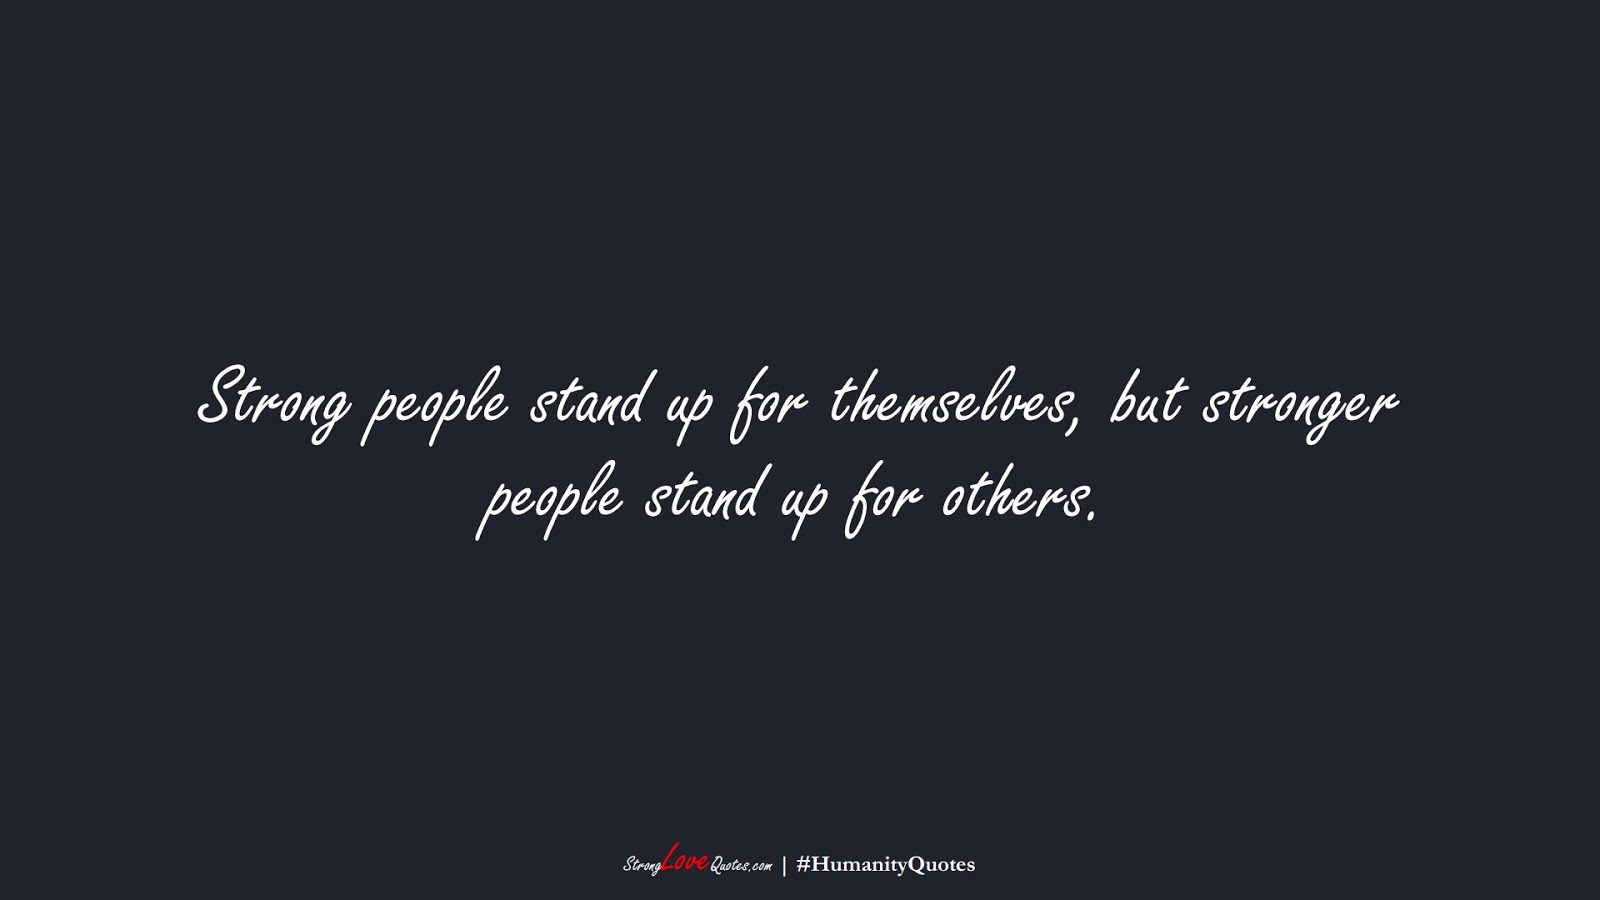 Strong people stand up for themselves, but stronger people stand up for others.FALSE